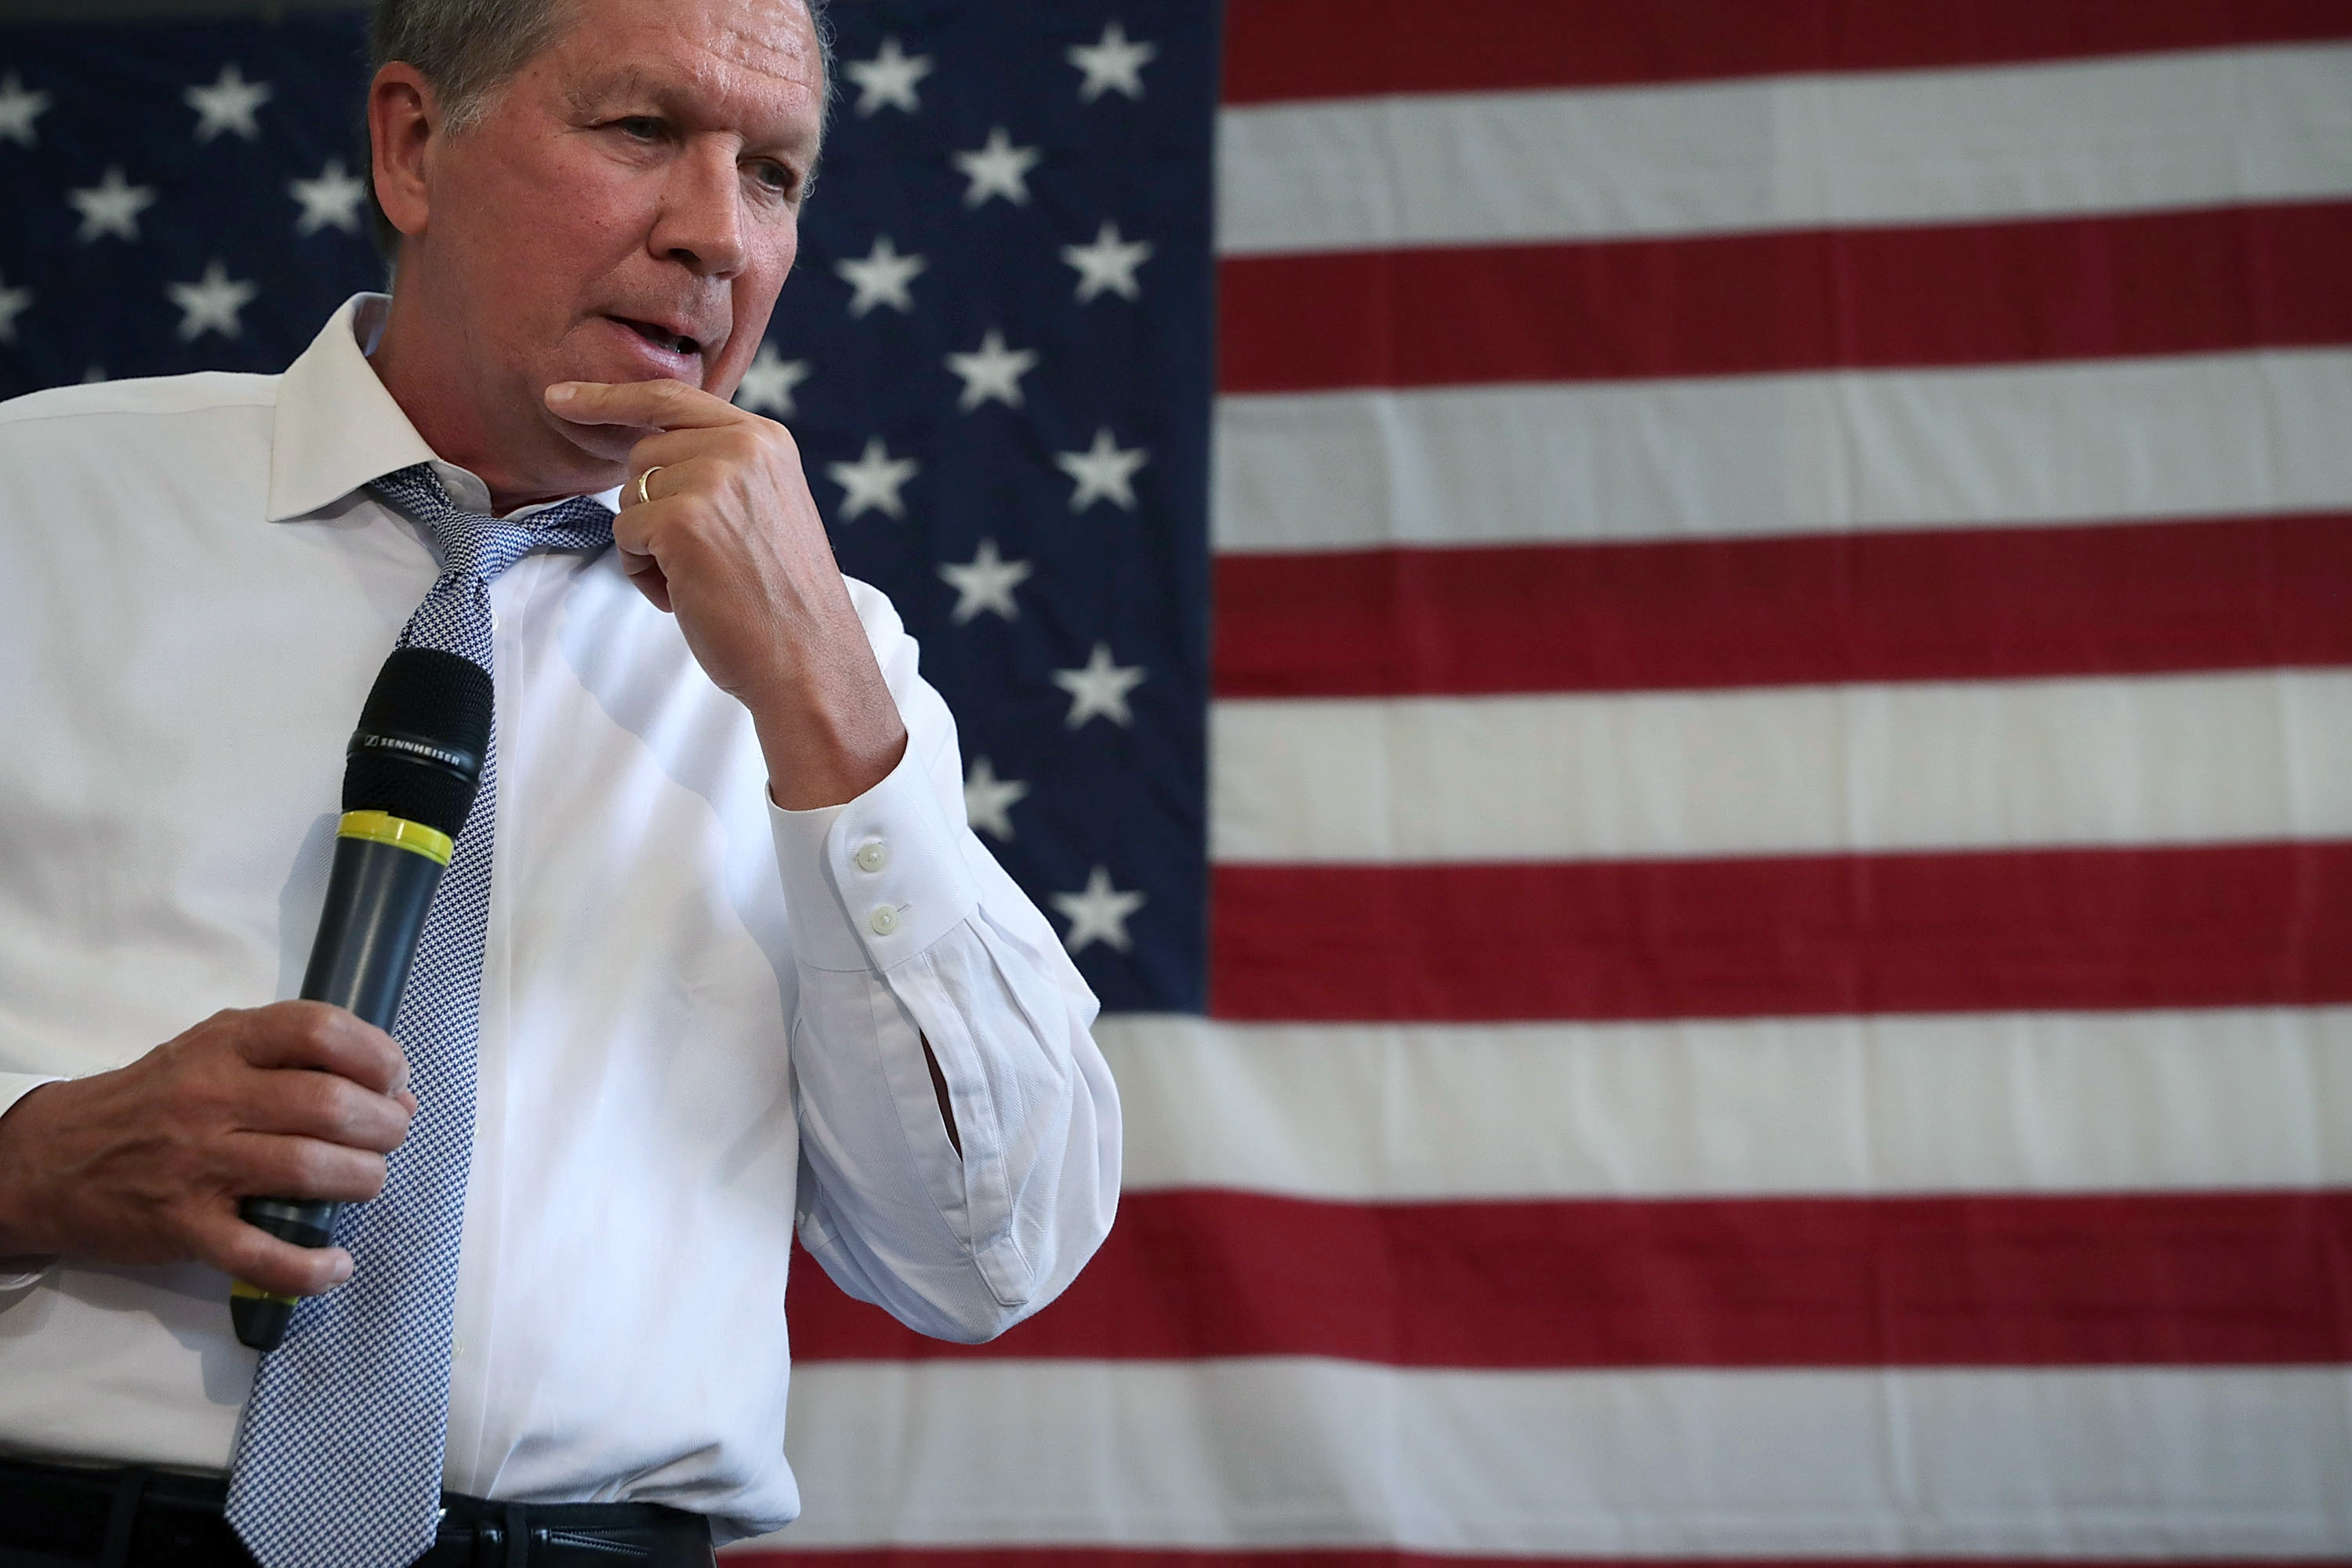 Republican presidential candidate and Ohio Governor John Kasich pauses during a campaign event on April 25, 2016 in Rockville, Maryland. (Alex Wong—Getty Images)